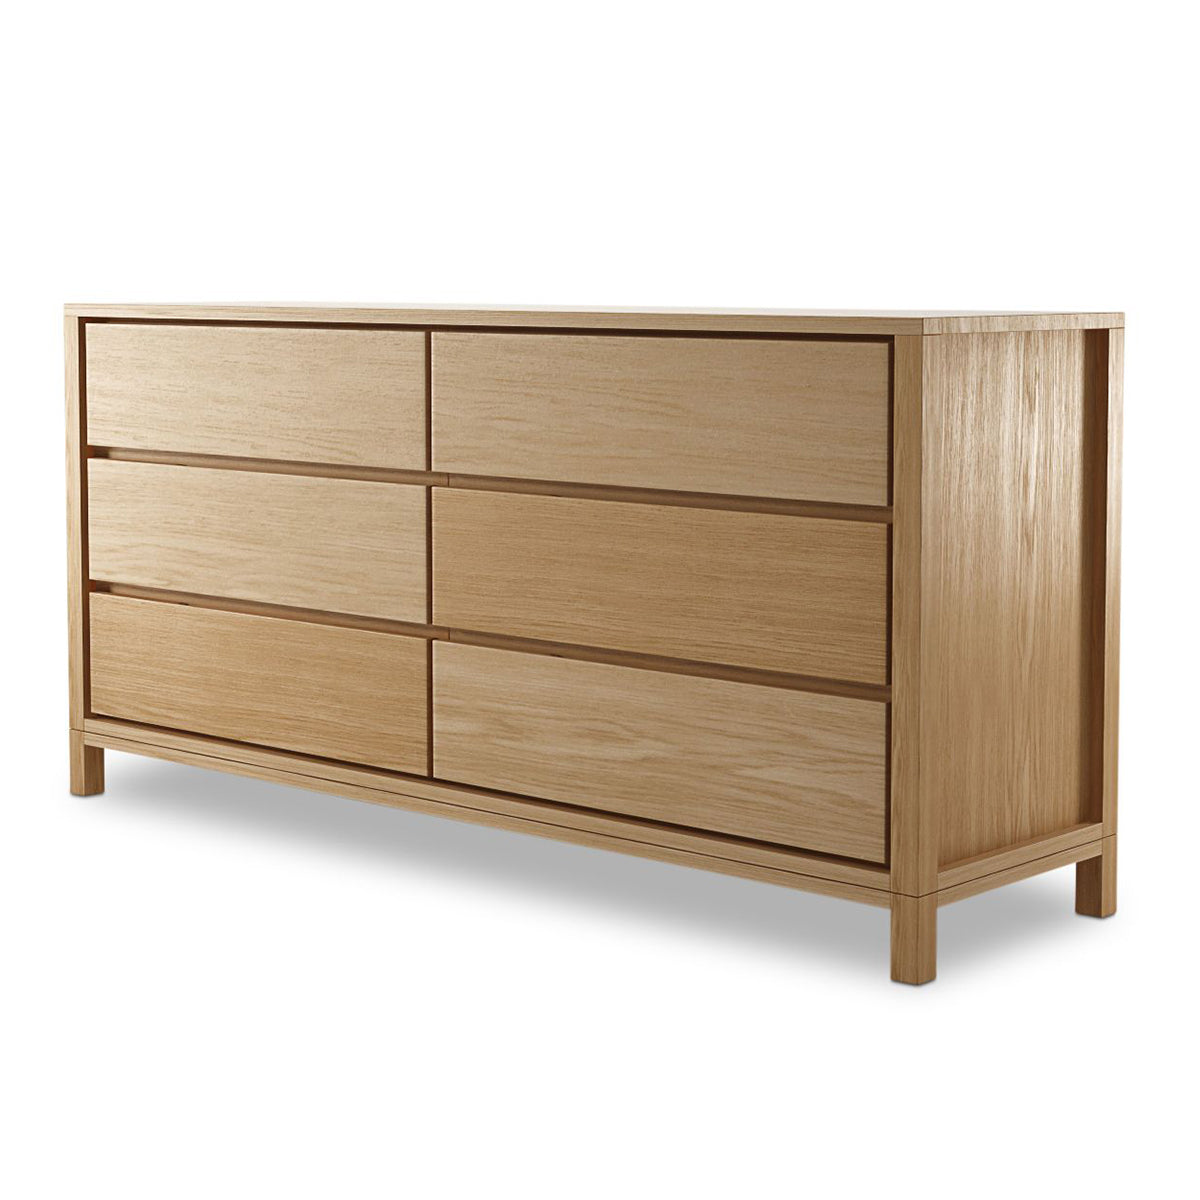 Solid Chest of Drawers - Large (European Oak).